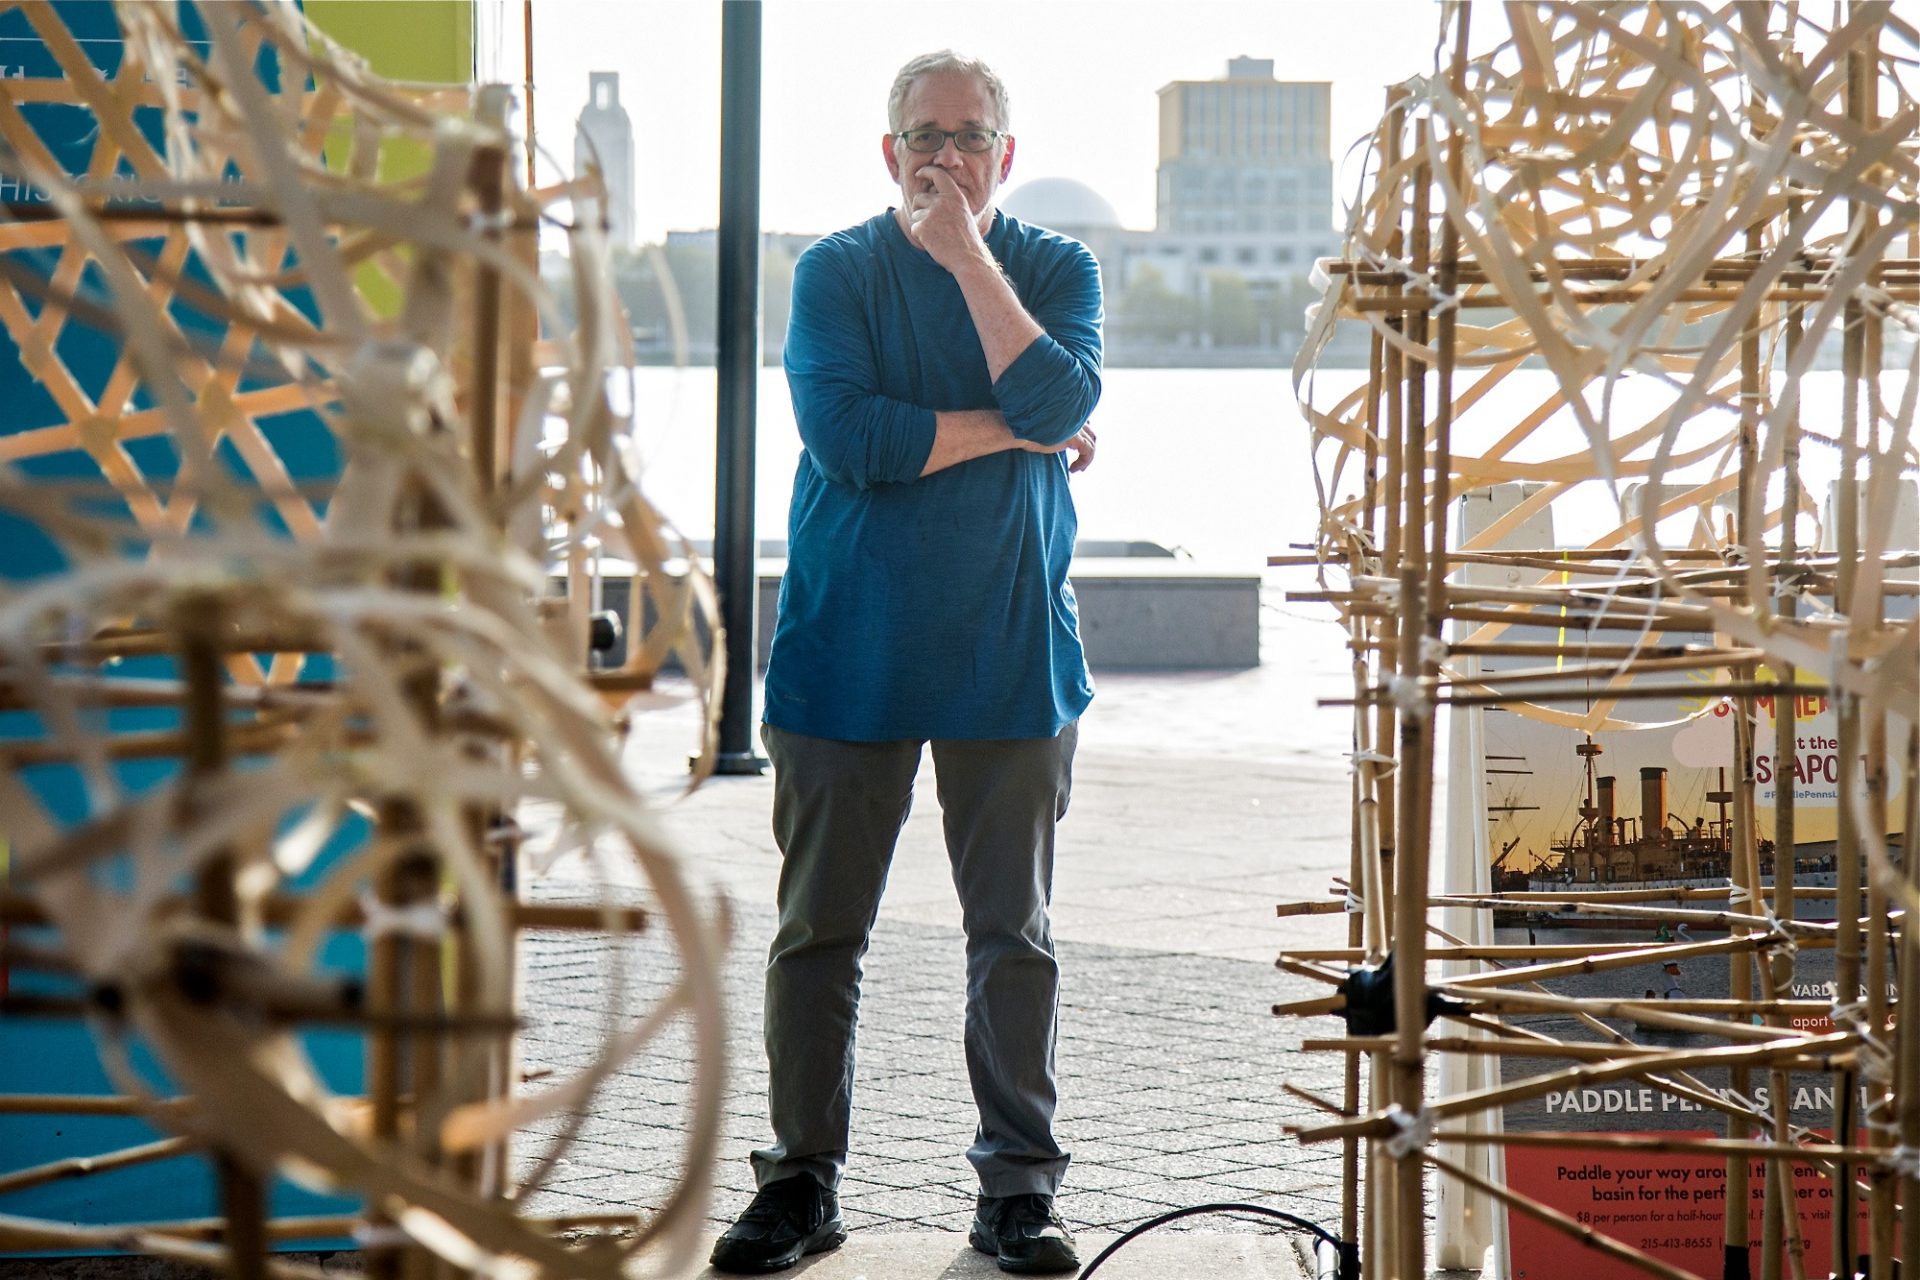 After a 34-year hiatus from showing his work in Philadelphia, Stephen Talasnik has come back for the art exhibit FLOW, a sculpture exhibit on the Delaware River in partnership with the Independence Seaport Museum and Philadelphia Sculptors.